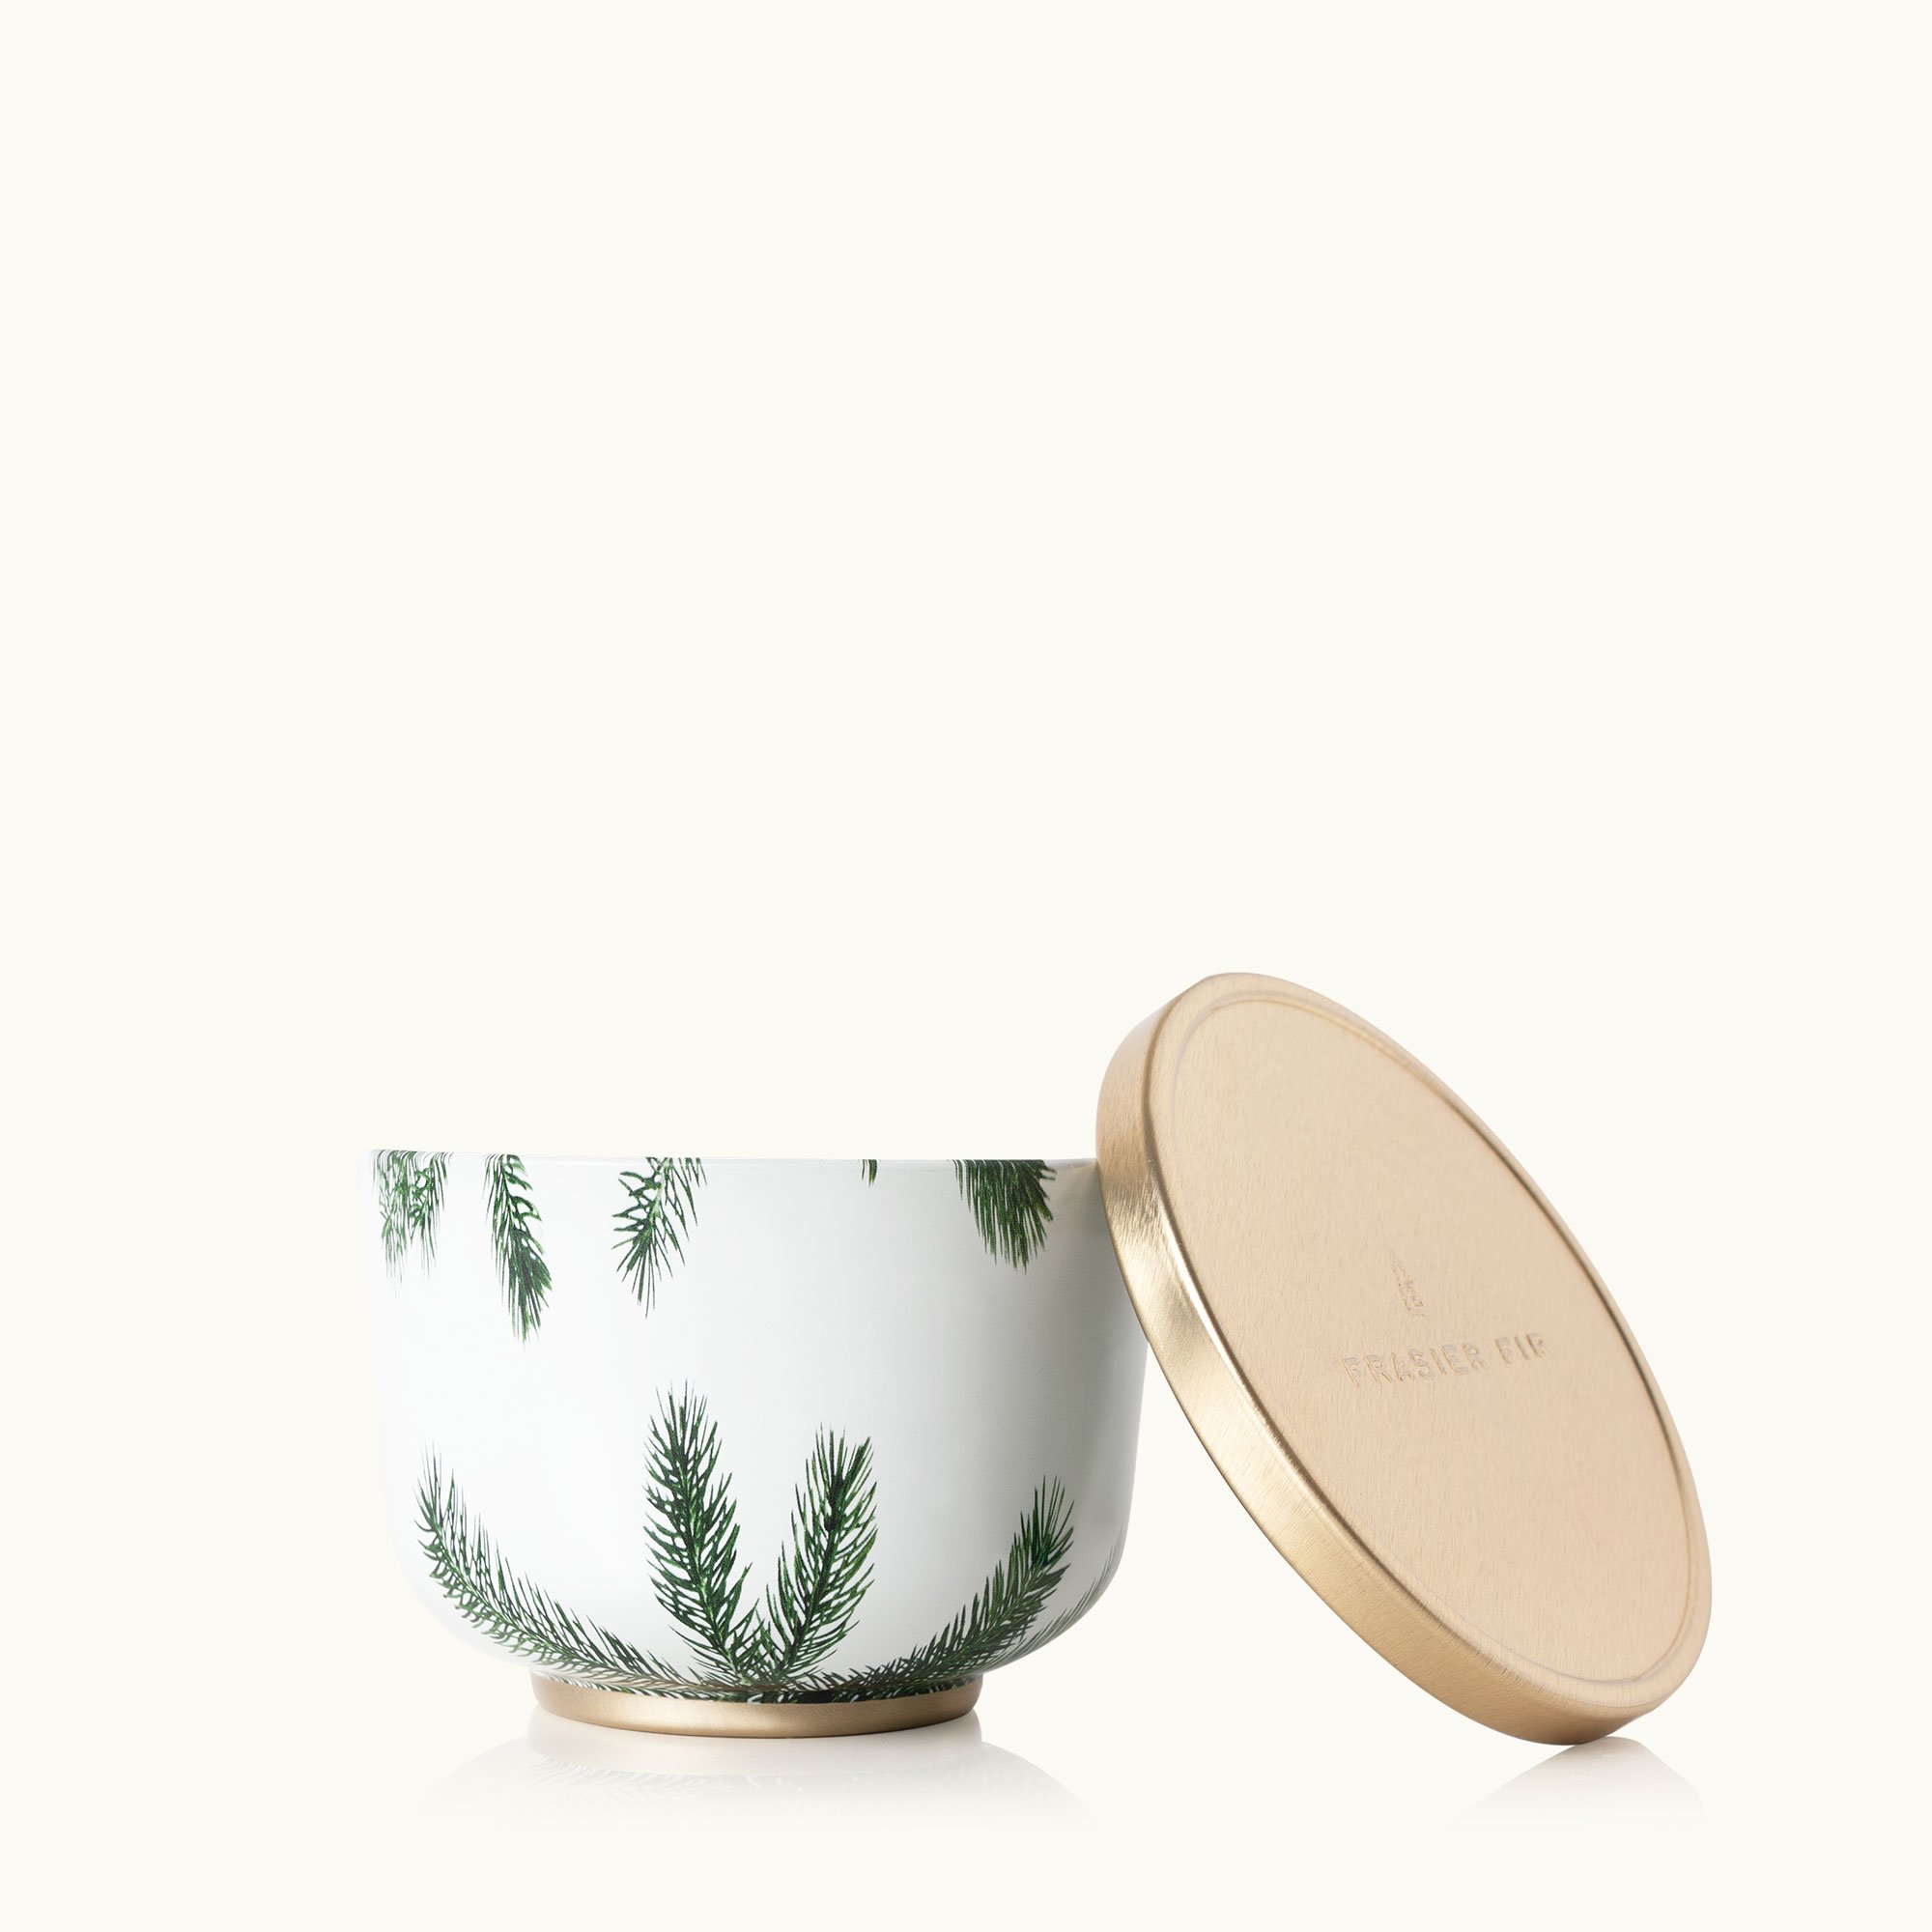 FRASIER FIR TRAVEL TIN CANDLE by THYMES – FAN TAN HOME & STYLE